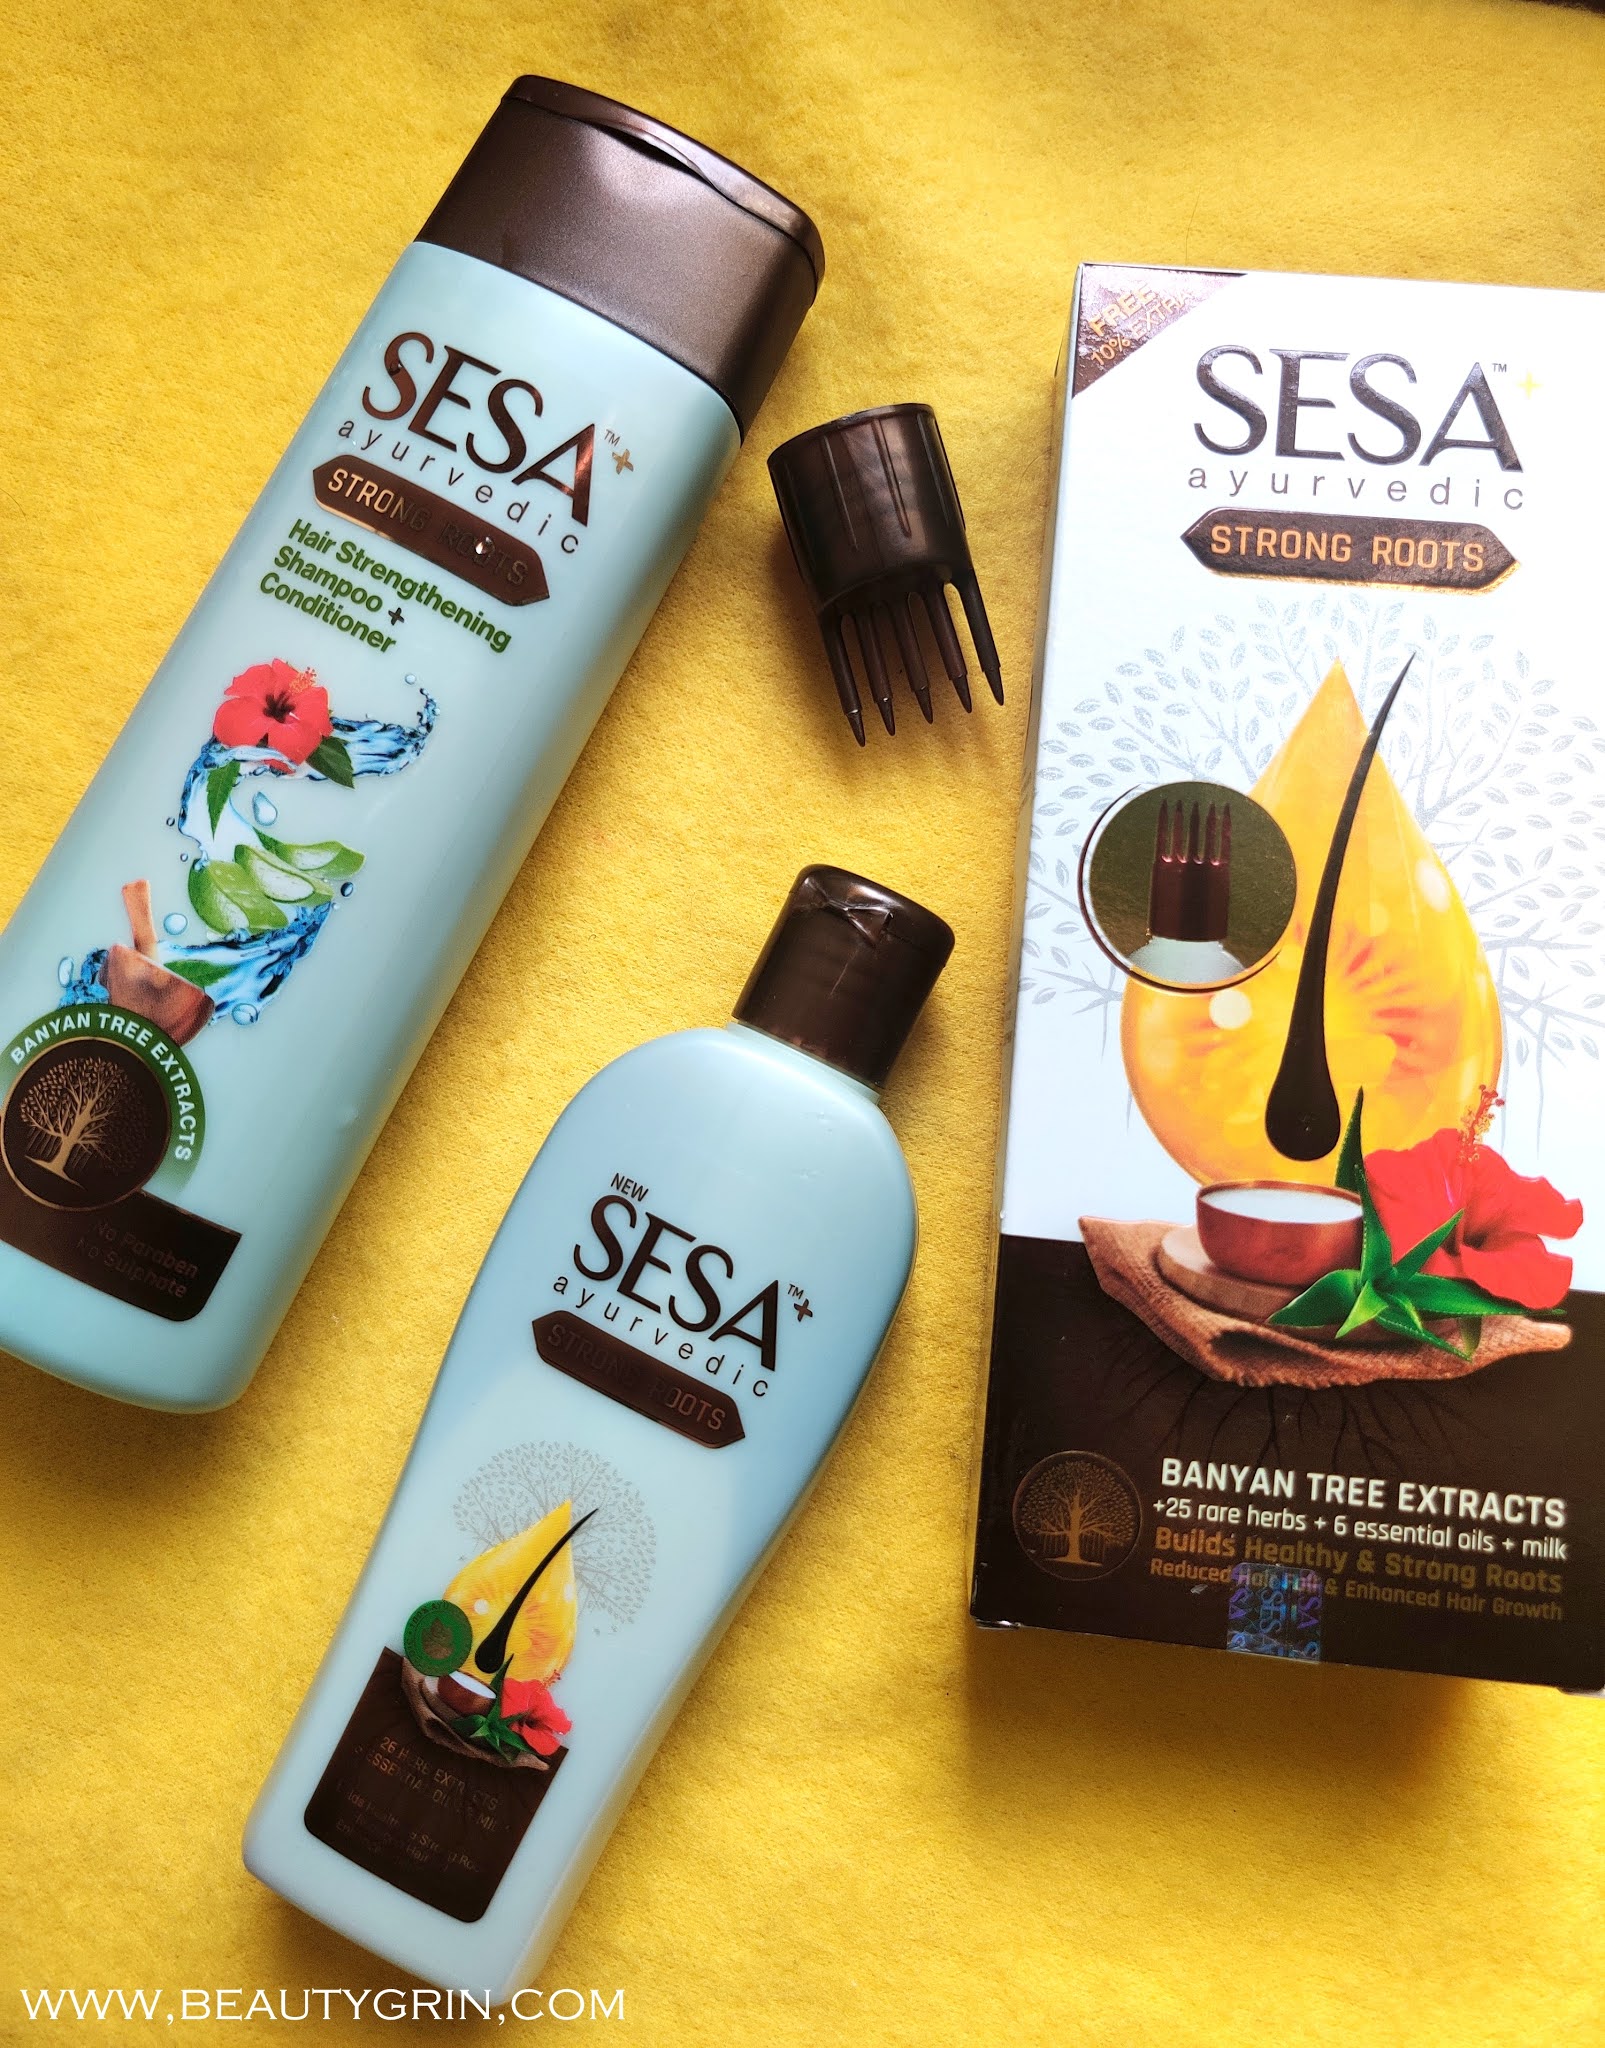 Trying out Sesa Ayurvedic Strong Roots Oil and Shampoo + Conditioner :  Review - BEAUTY GRIN